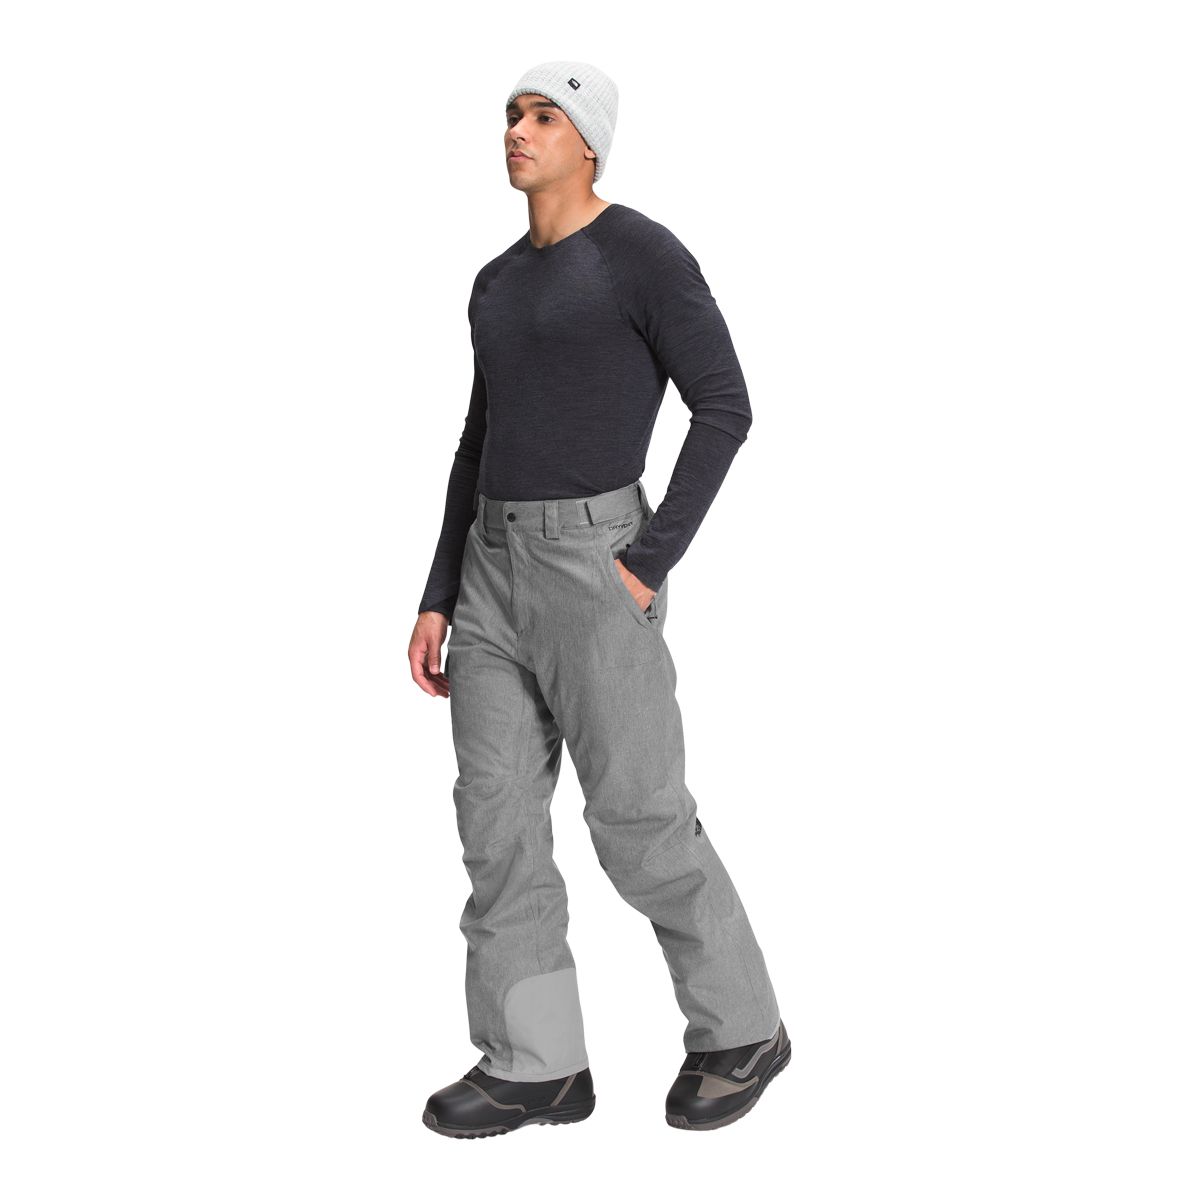 Item 946070 - The North Face Freedom HyVent Ski Pants - Men's